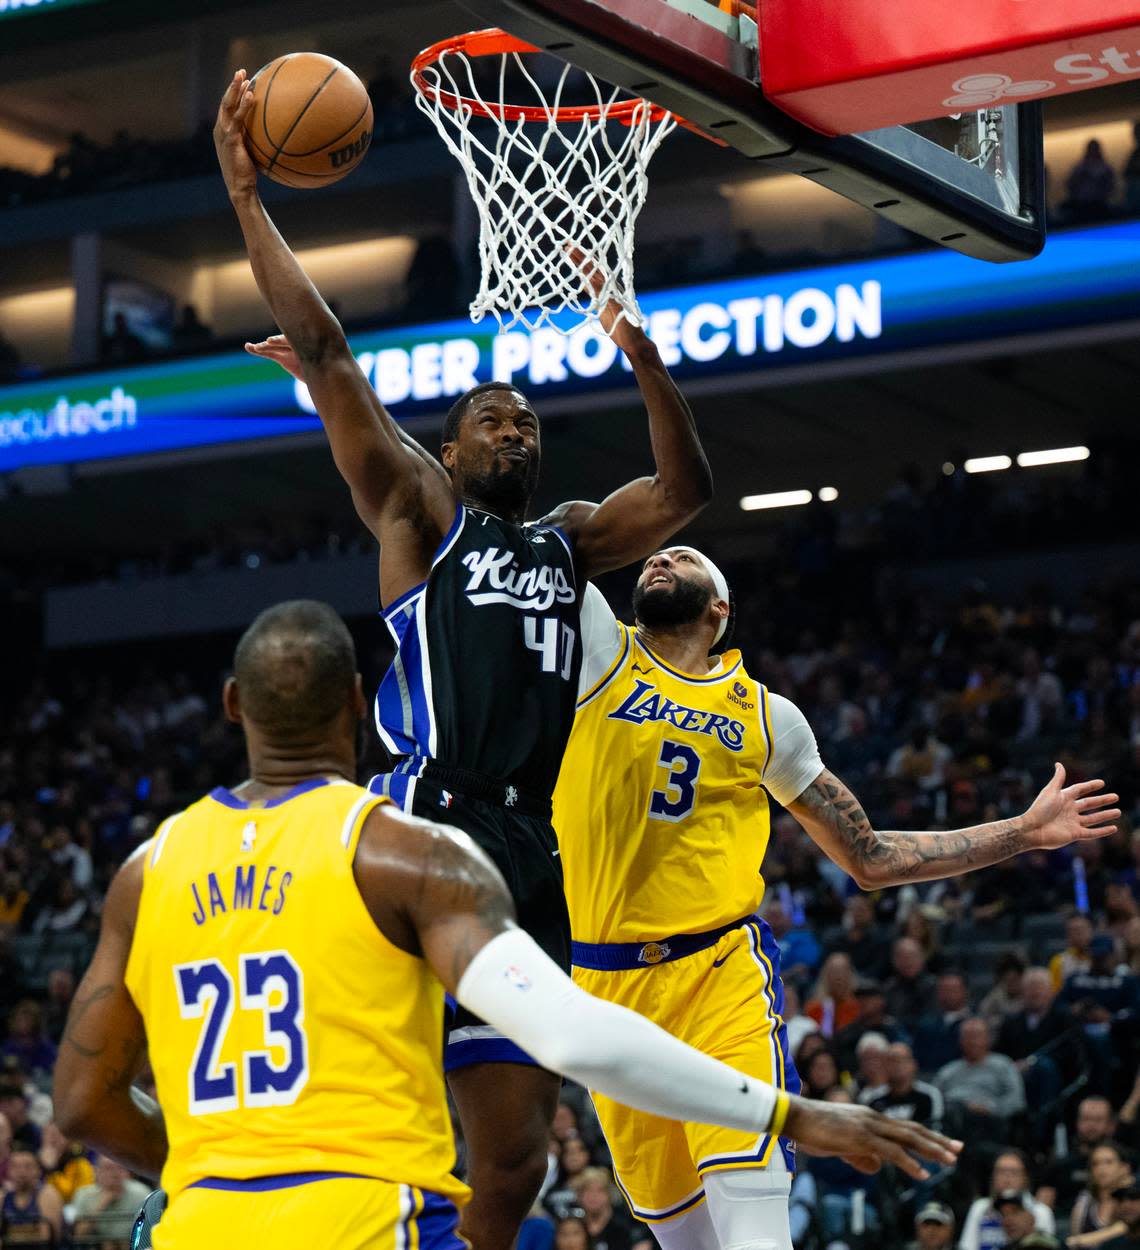 Sacramento Kings forward Harrison Barnes (40) drives to the basket between Los Angeles Lakers forwards LeBron James (23) and Anthony Davis (3) during a game at Golden 1 Center on Wednesday.